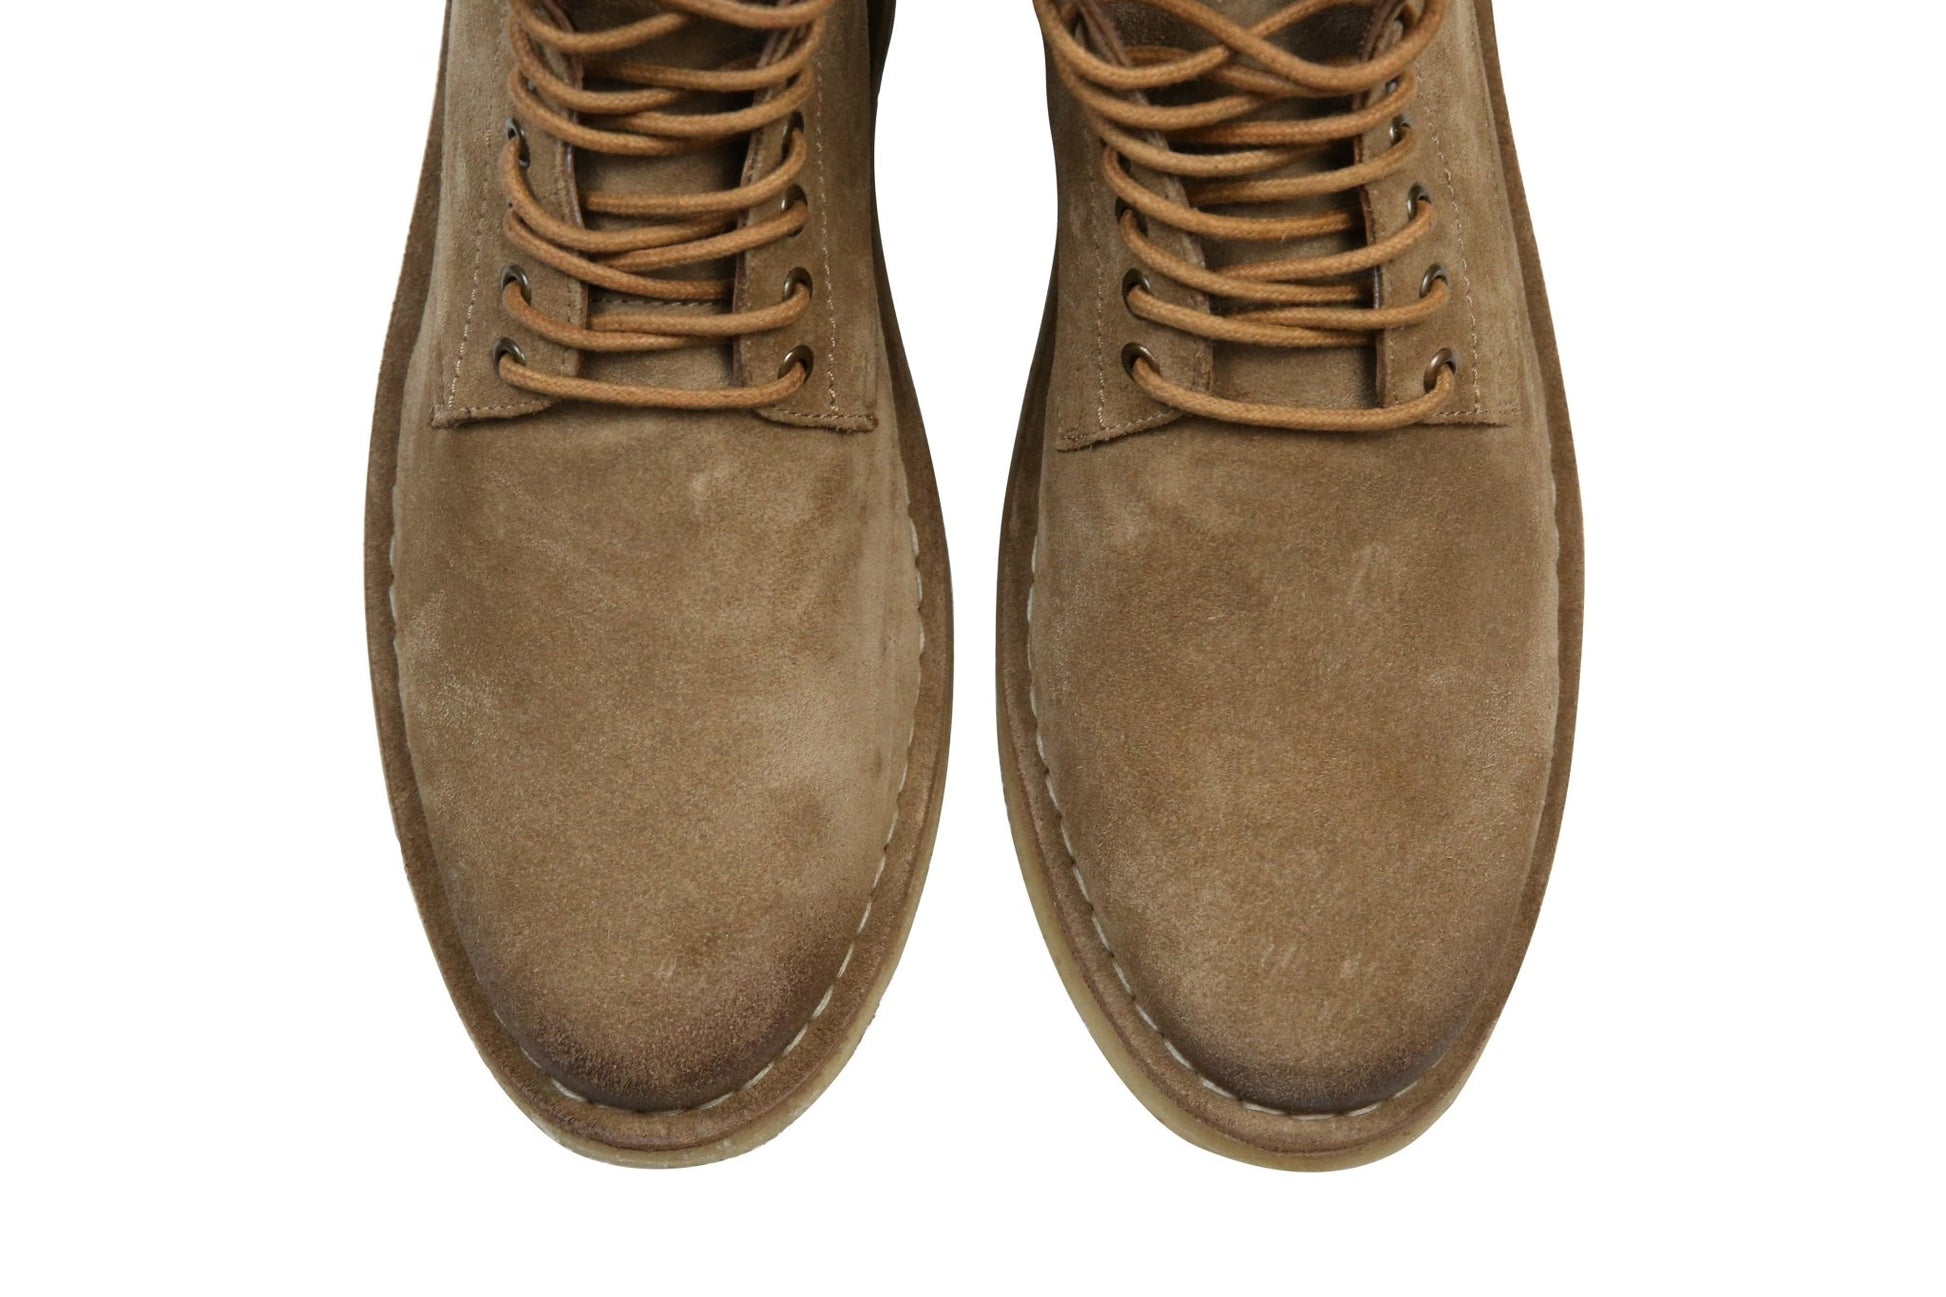 Hound & Hammer "The Hunter" Men's Sand Leather Urban Hiking Boots - Men - Footwear - Boots - Ankle Boots - Benn~Burry